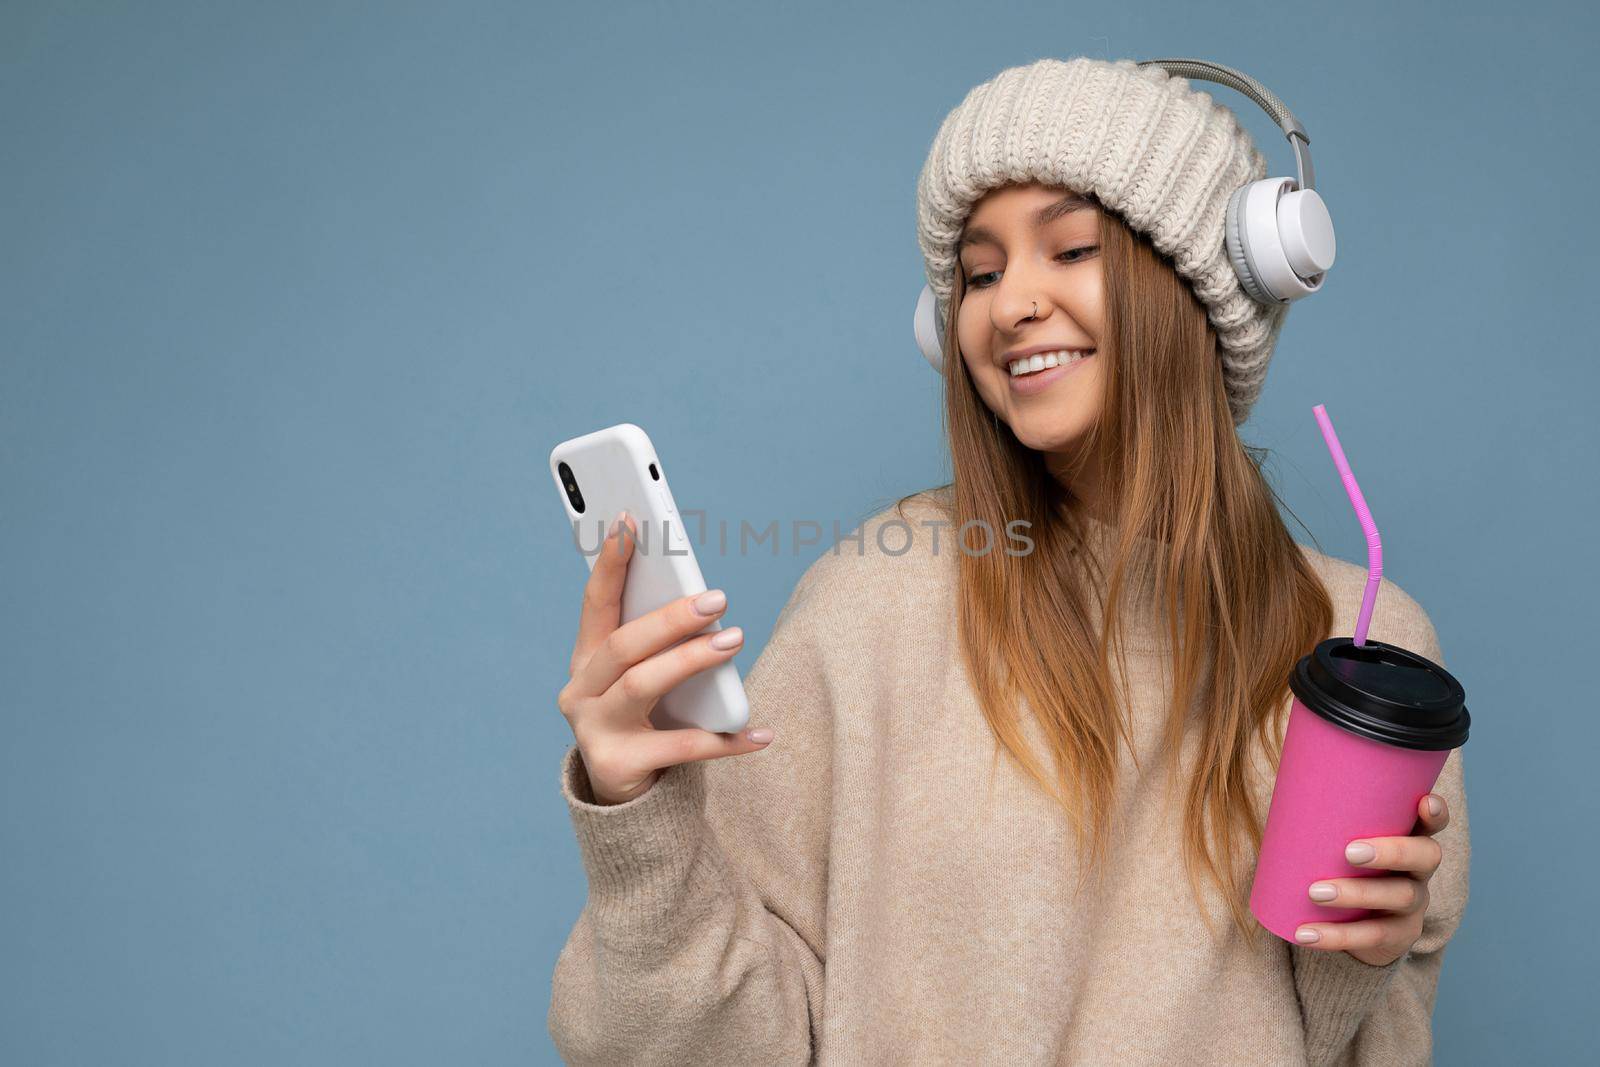 Attractive happy smiling young blonde woman wearing beige sweater and beige hat white headphones isolated over blue background holding in hand and using mobile phone reading news drinking beverage and listening to music looking at gadjet display by TRMK